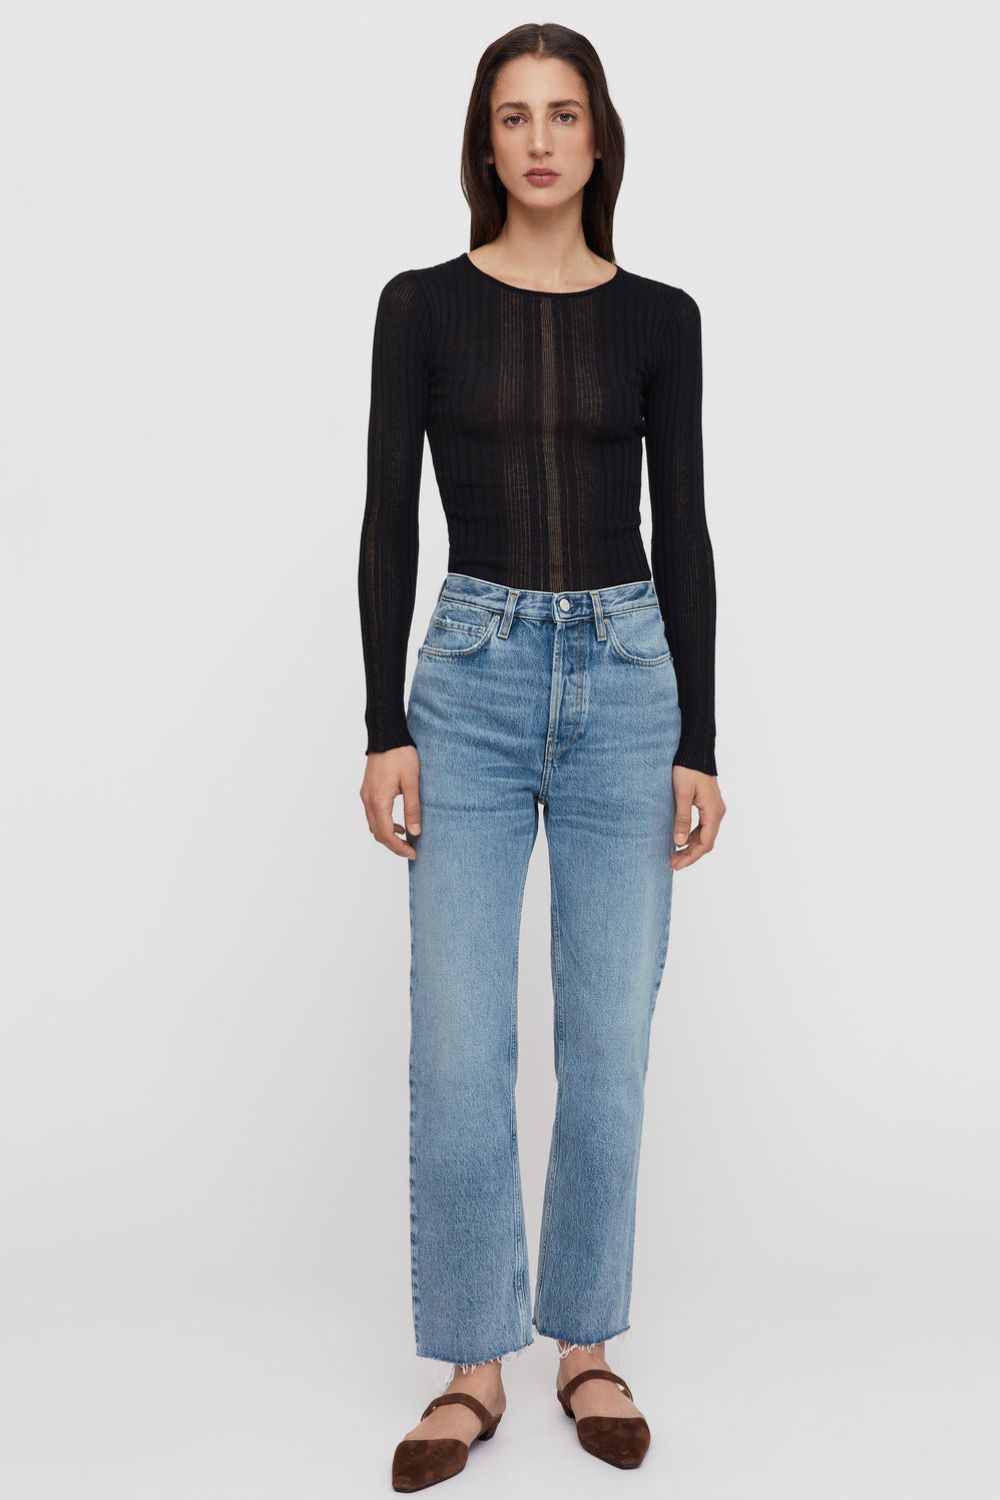 The-Gloss-Magazine-best-straight-leg-jeans-to-buy-now-6